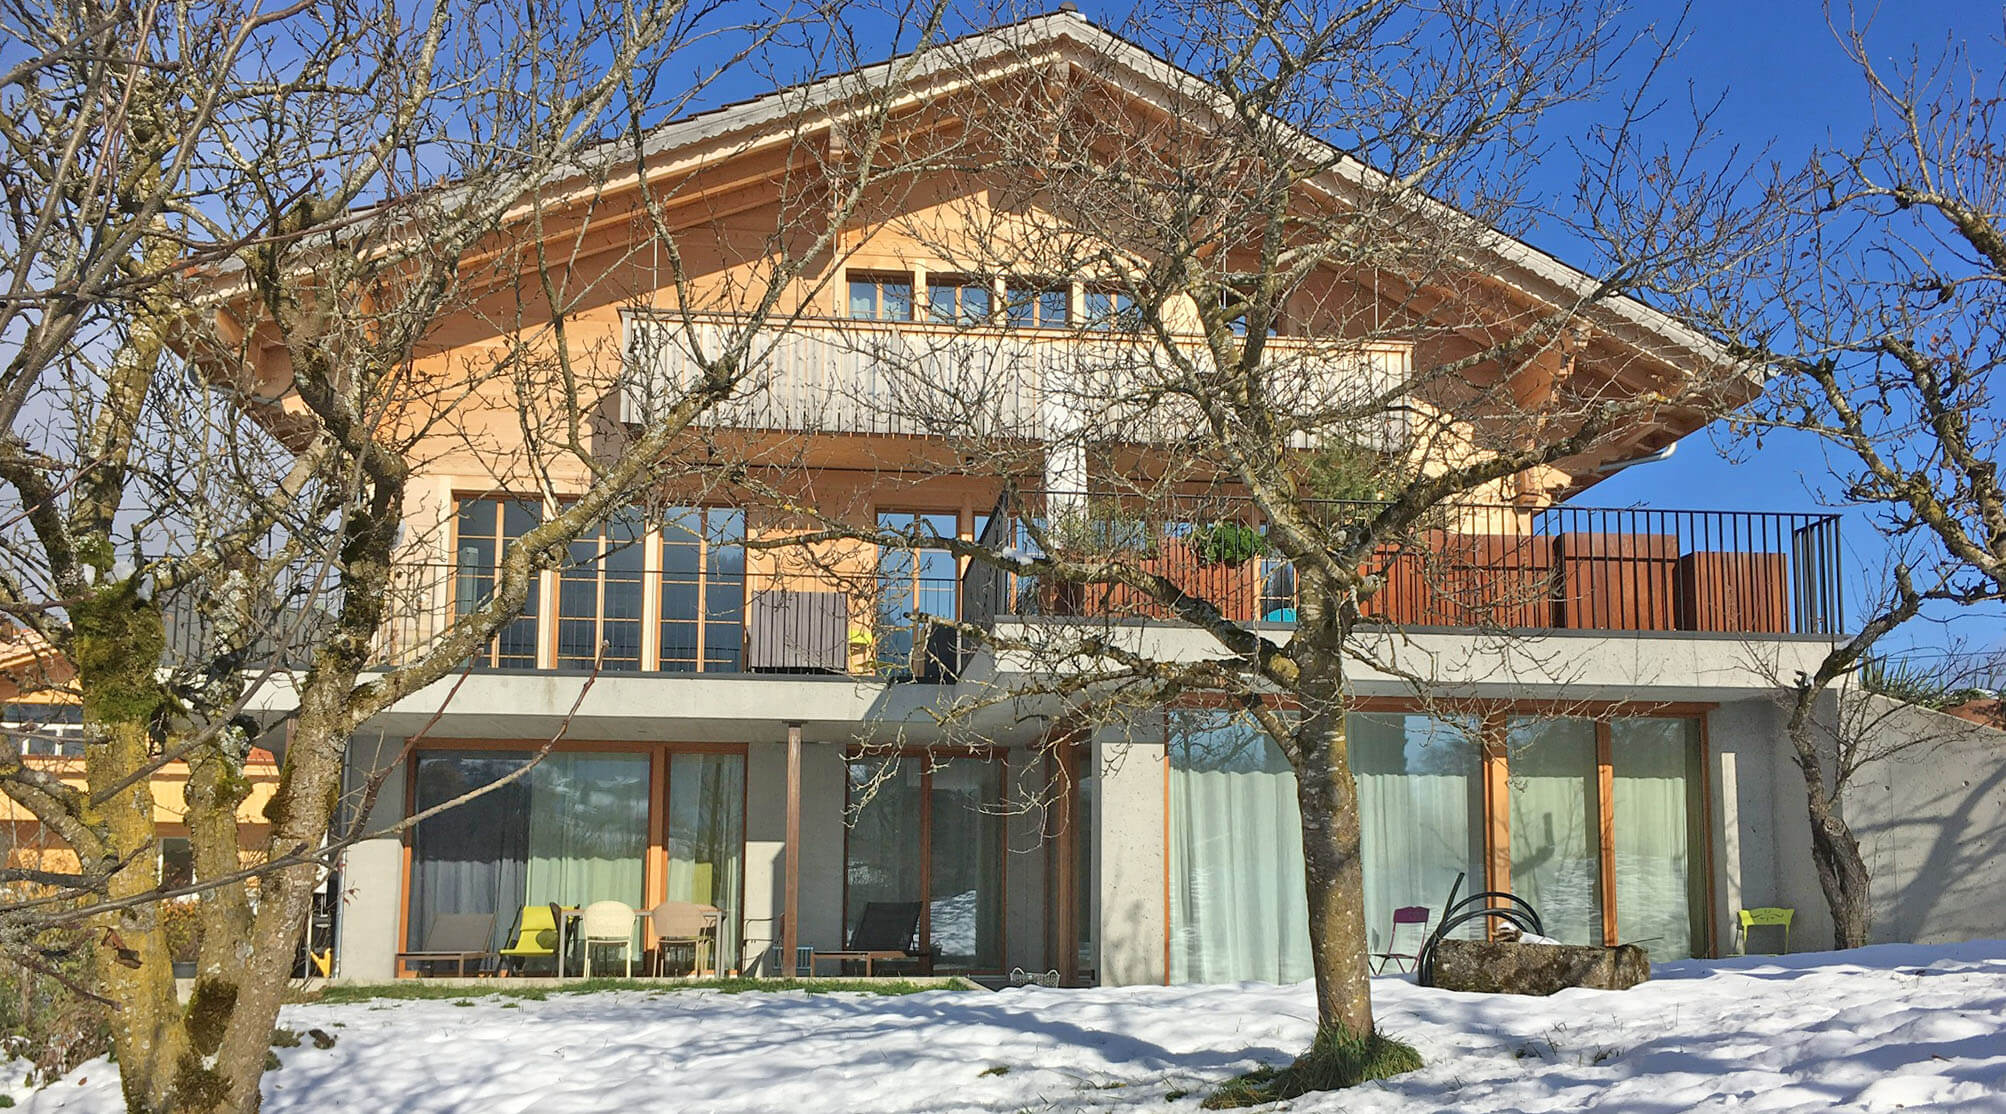 Exterior view Chalet Park in winter